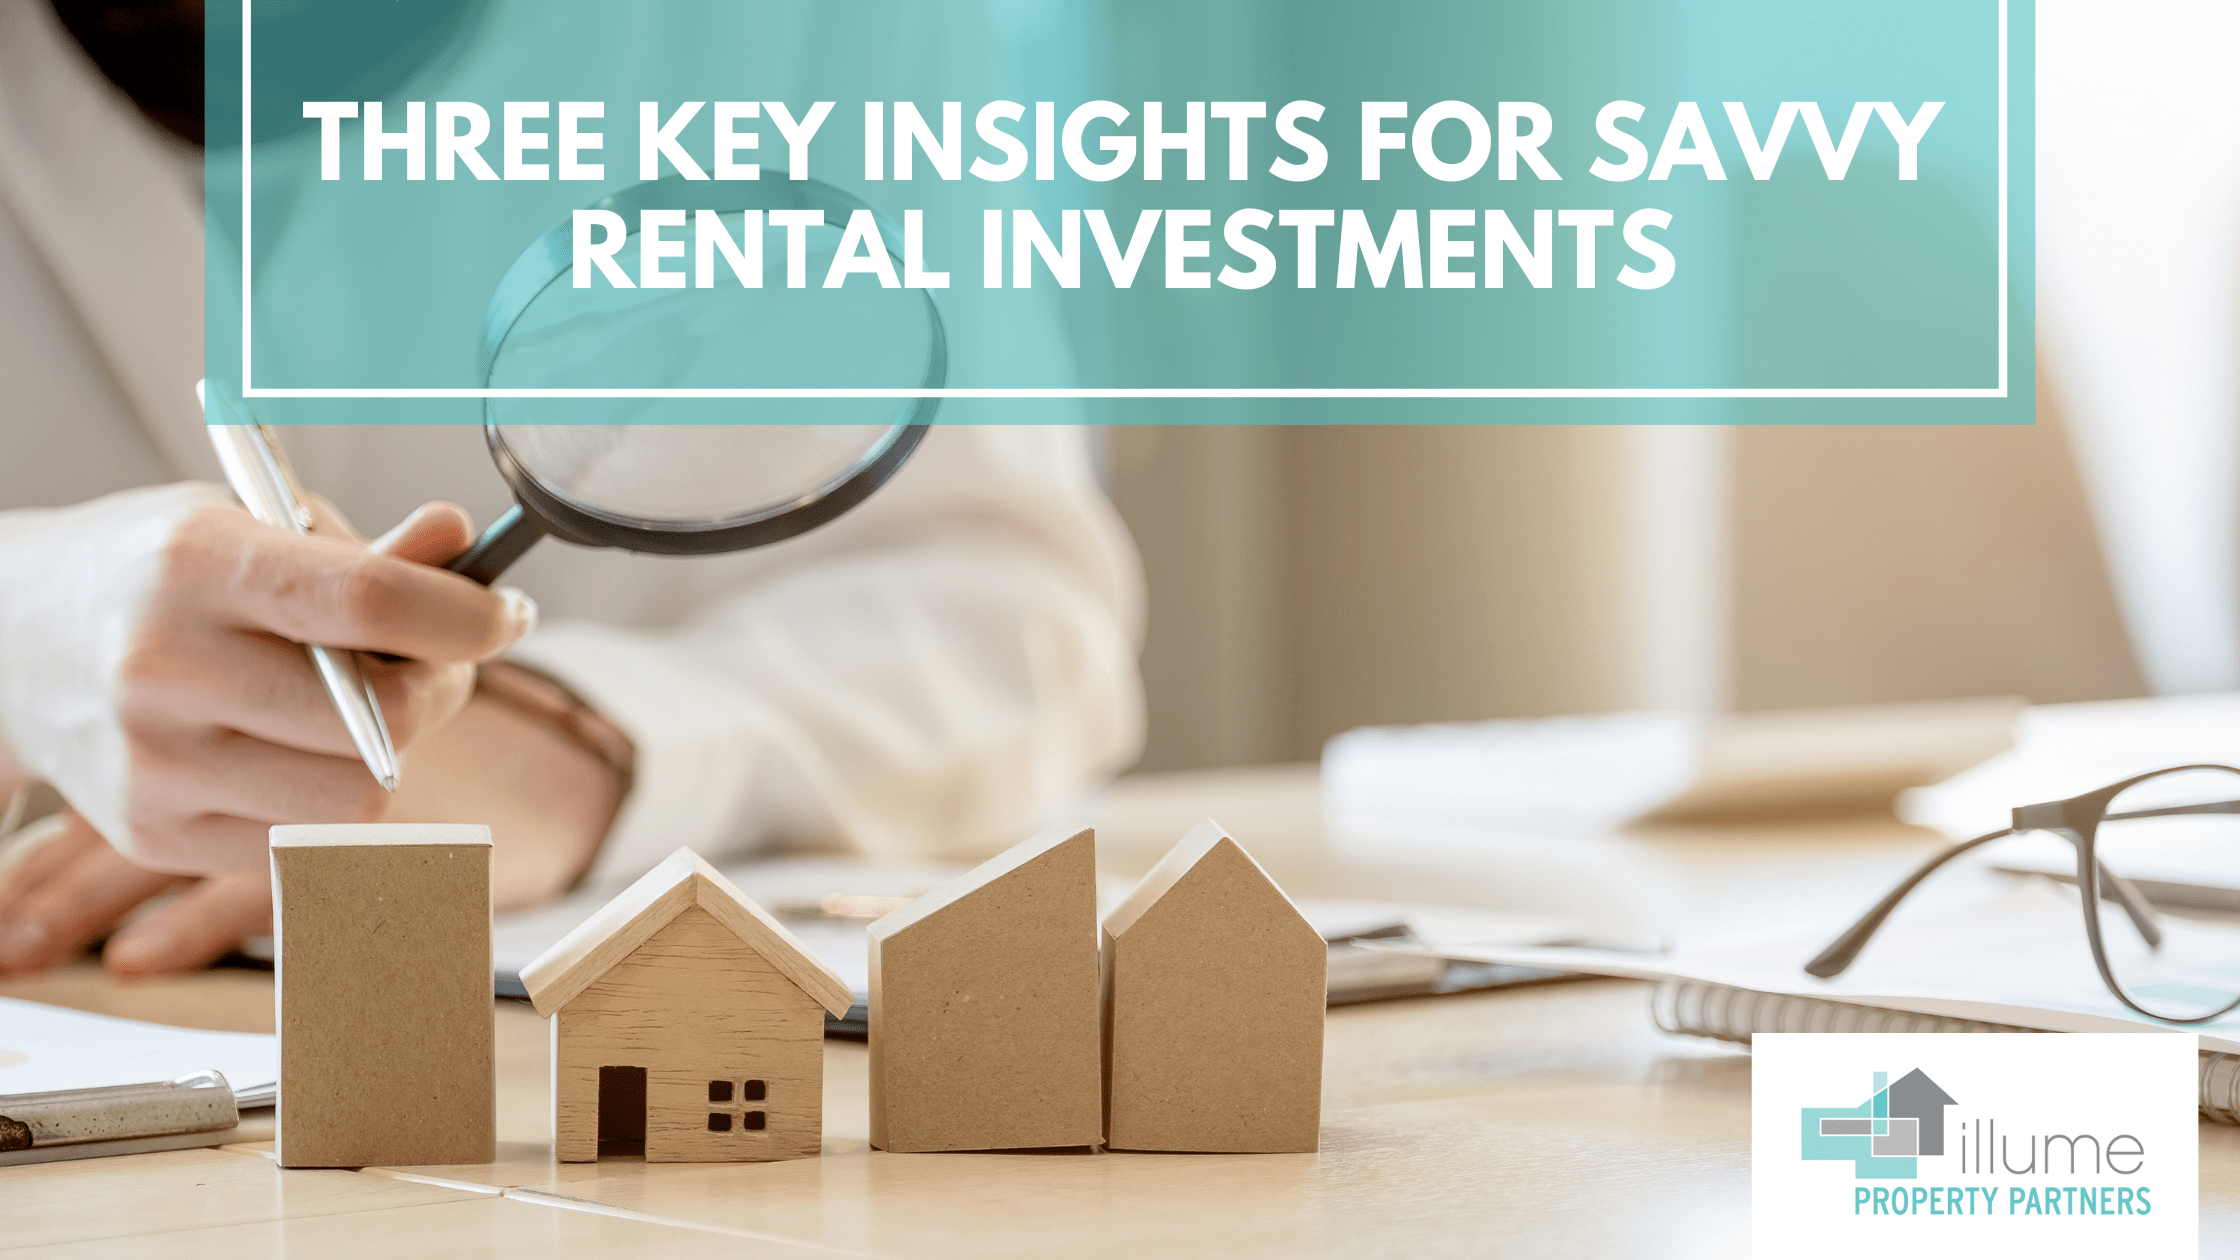 Three Key Insights for Savvy Rental Investments